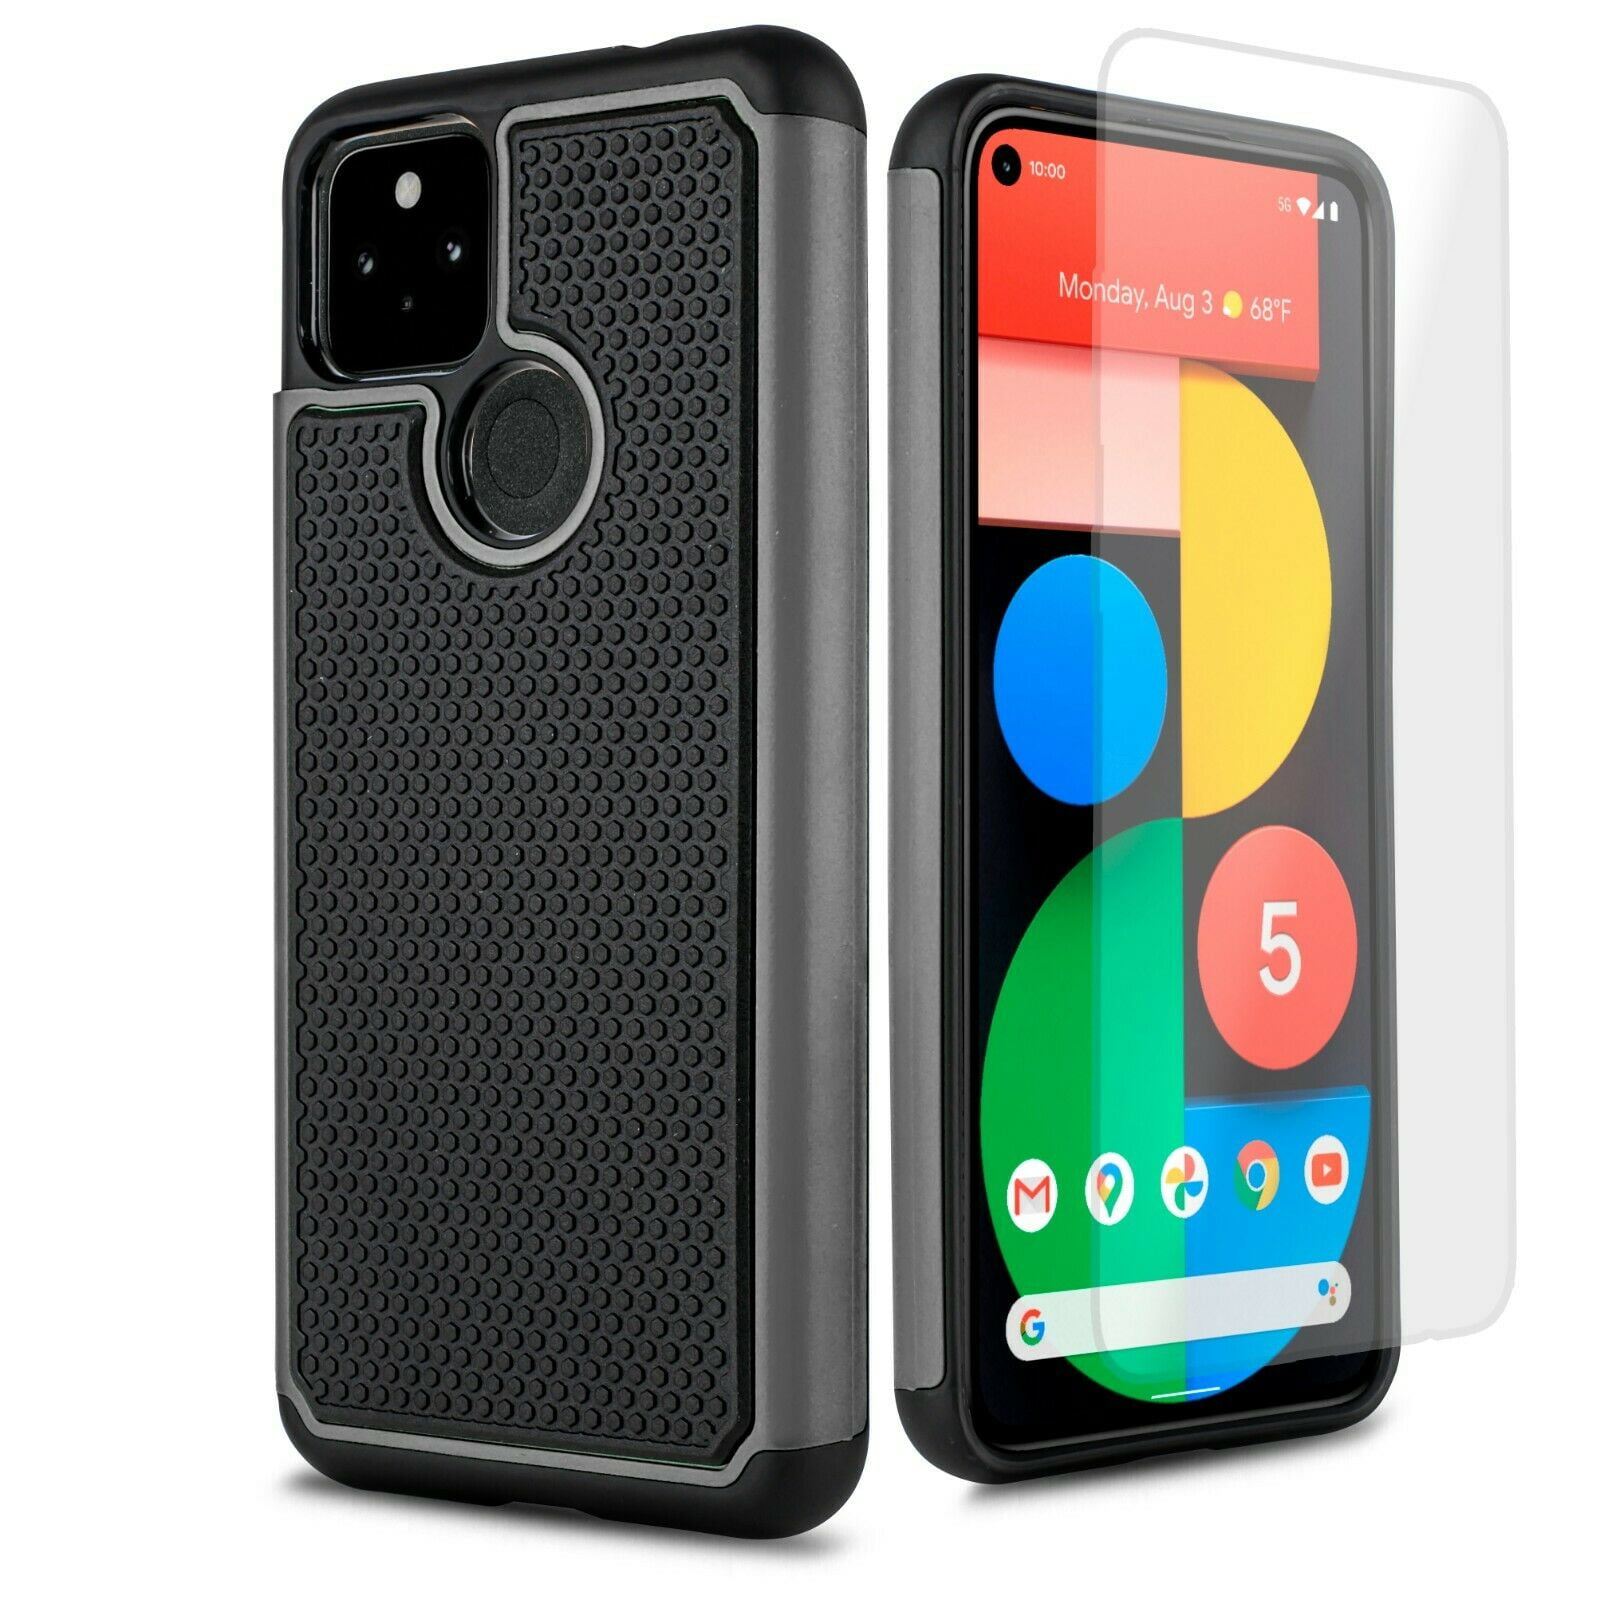 4A 5G 4 XL Luxury Slim TPU Leather Hybrid Case Rugged Cover For Google Pixel 5 